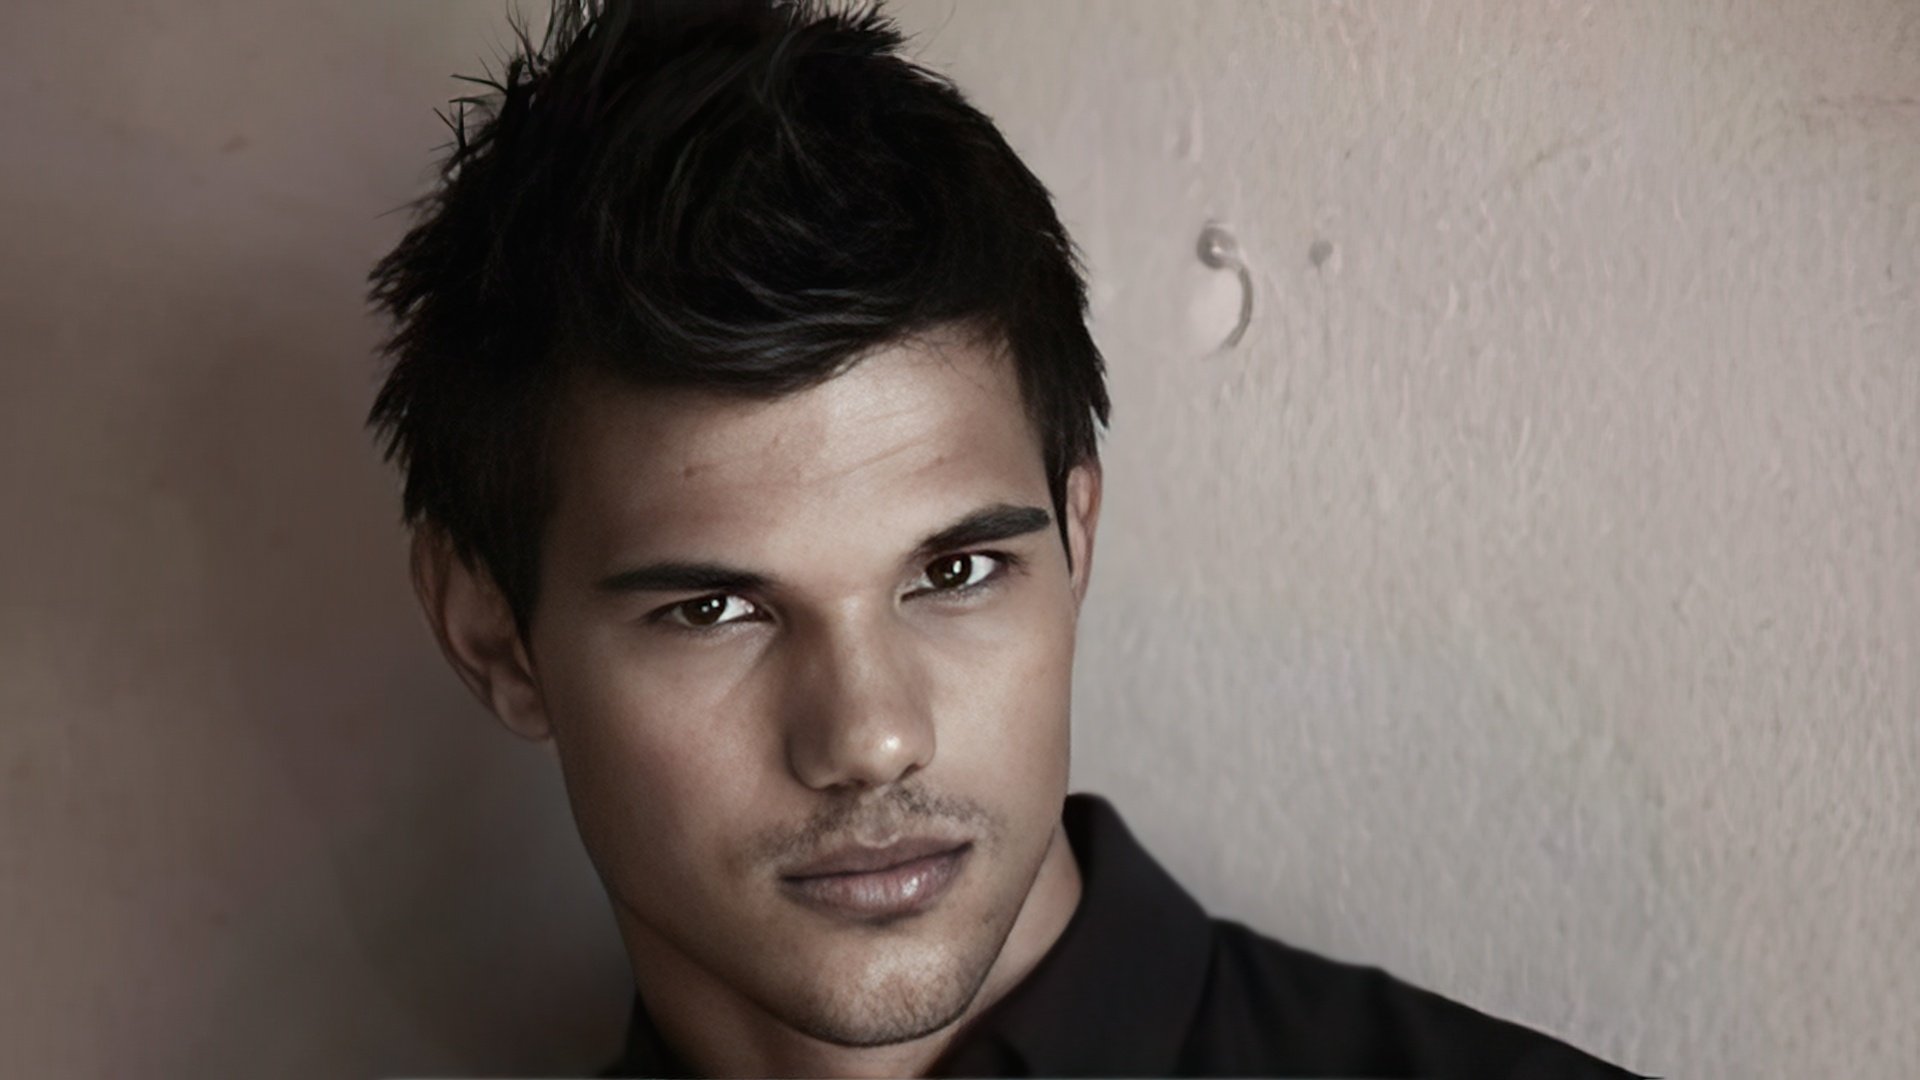 In the photo - Taylor Lautner